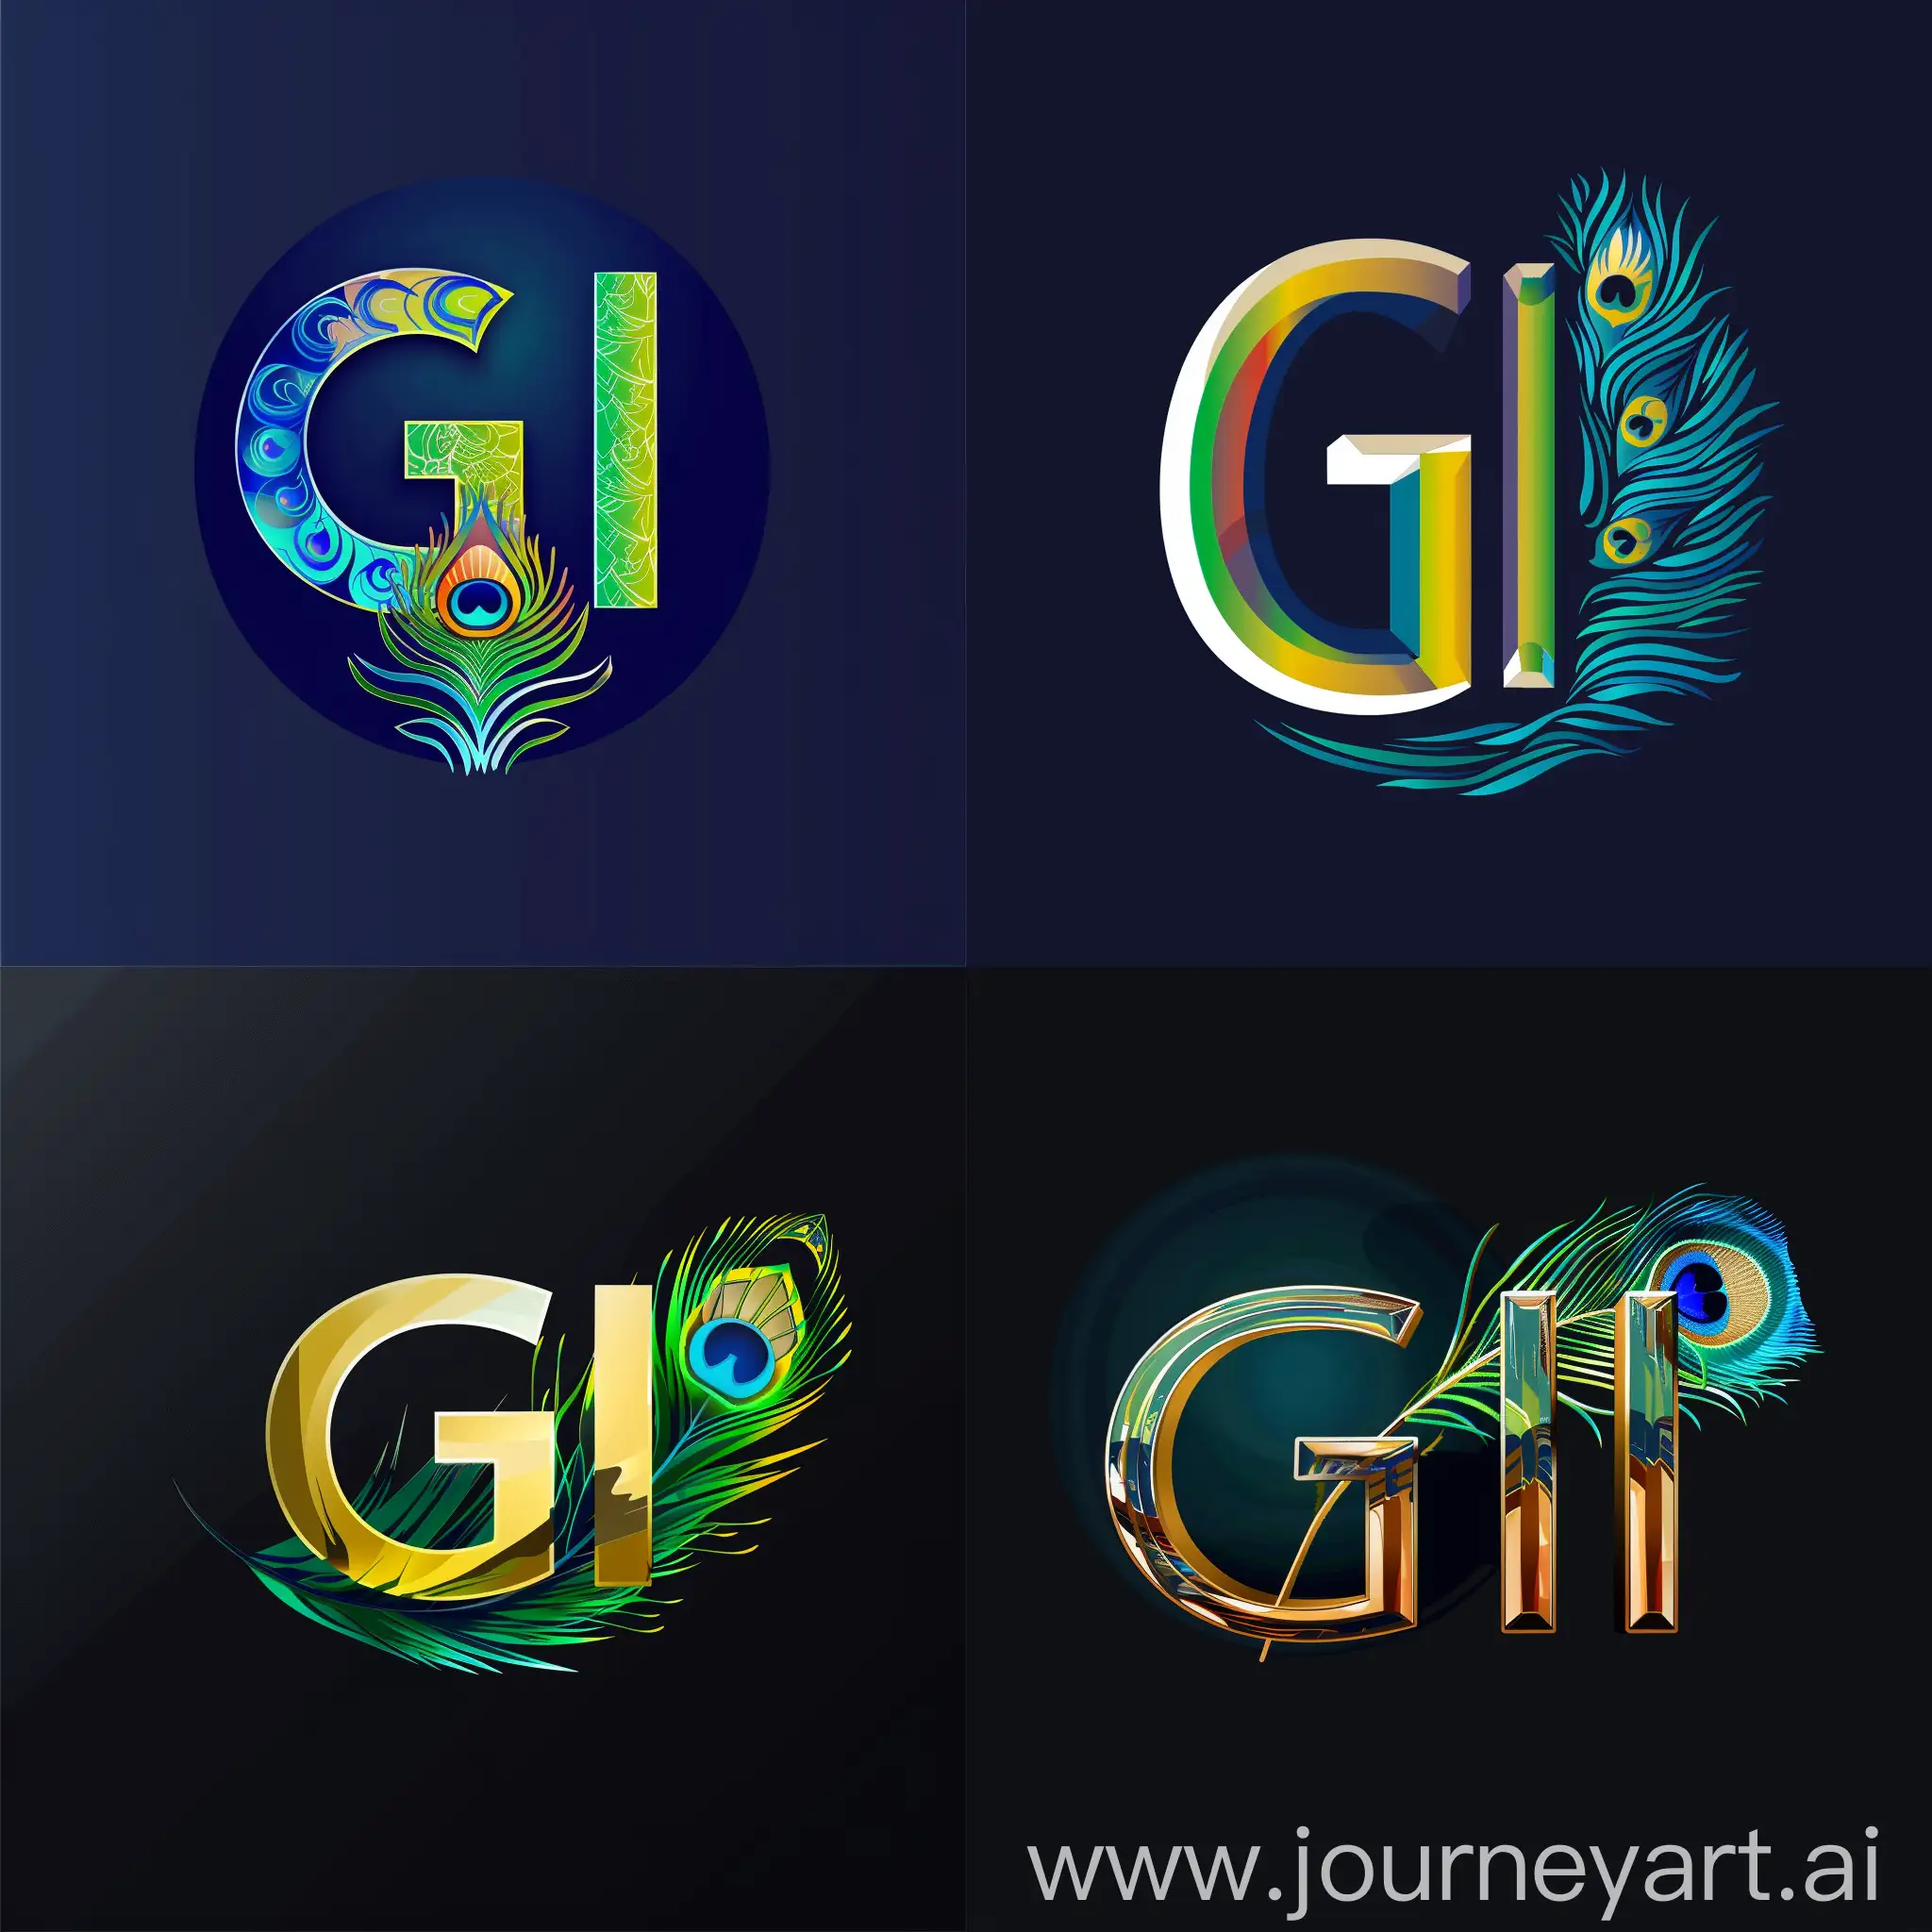 create a logo for information technology company with GI letters embeded with peacock feather for company